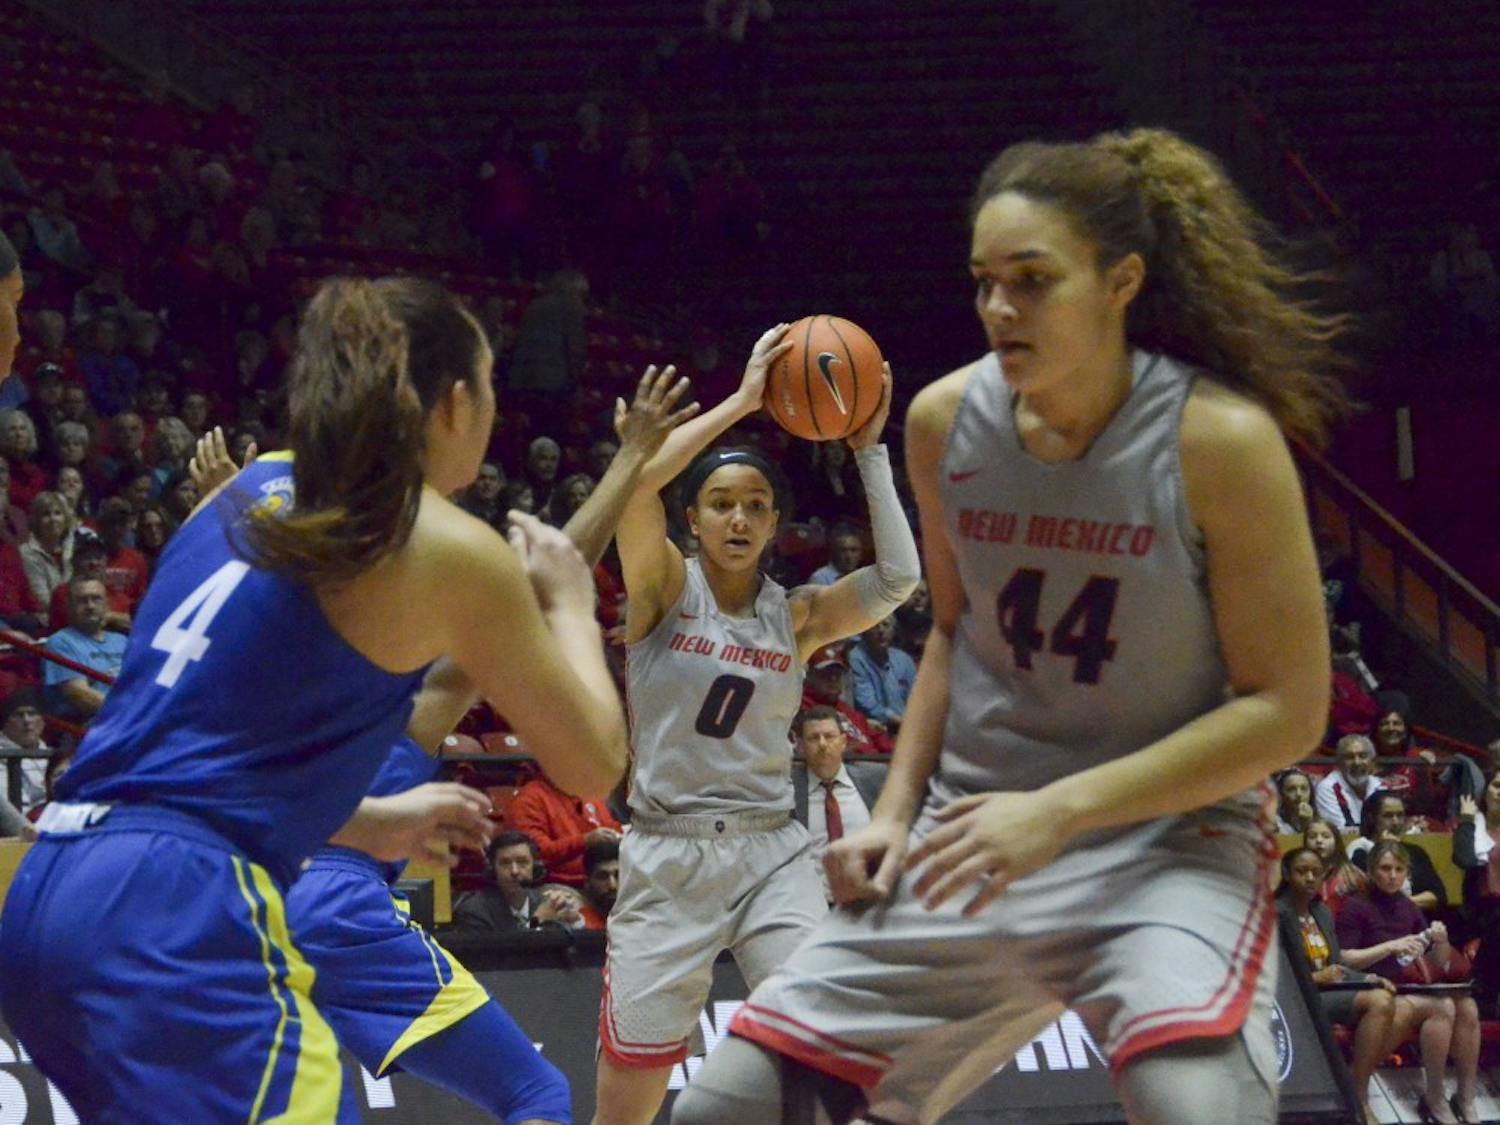 Cherise Beynon sets up a pass during the UNM Woman's Basketball game against San Jose State on Feb. 3, 2018. &nbsp;UNM took the victory in a landslide win 92-62.&nbsp;